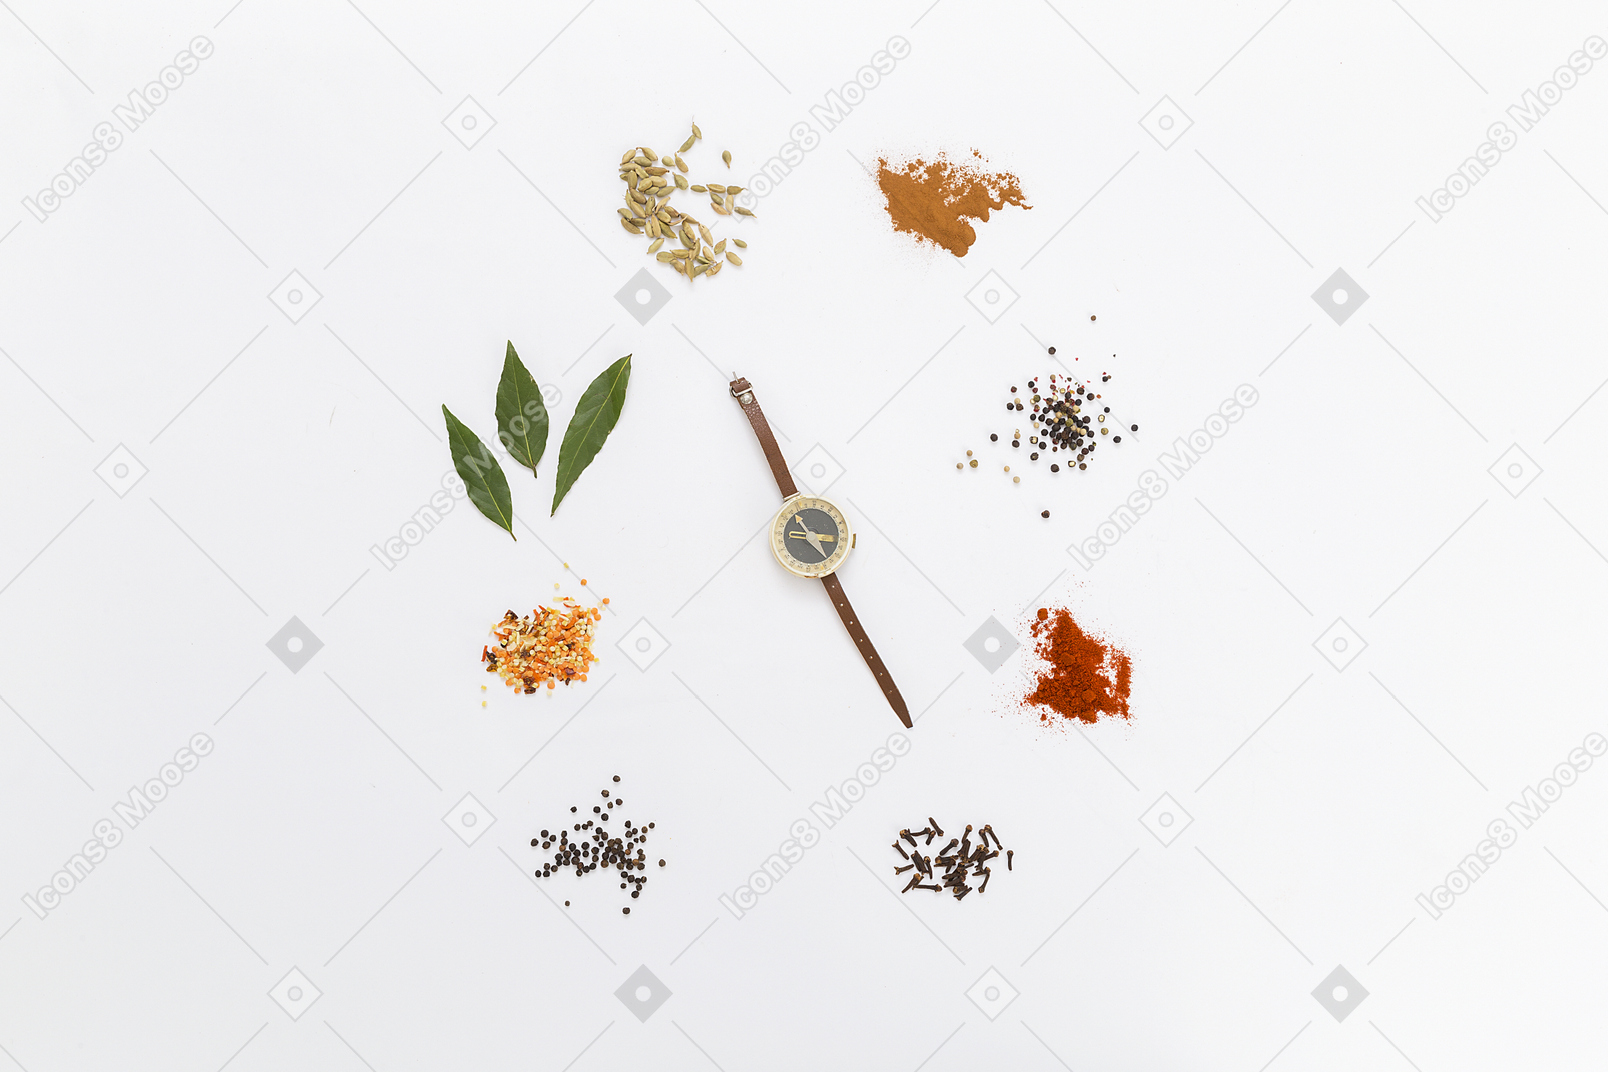 Circle of herbs and spices with compass in centre